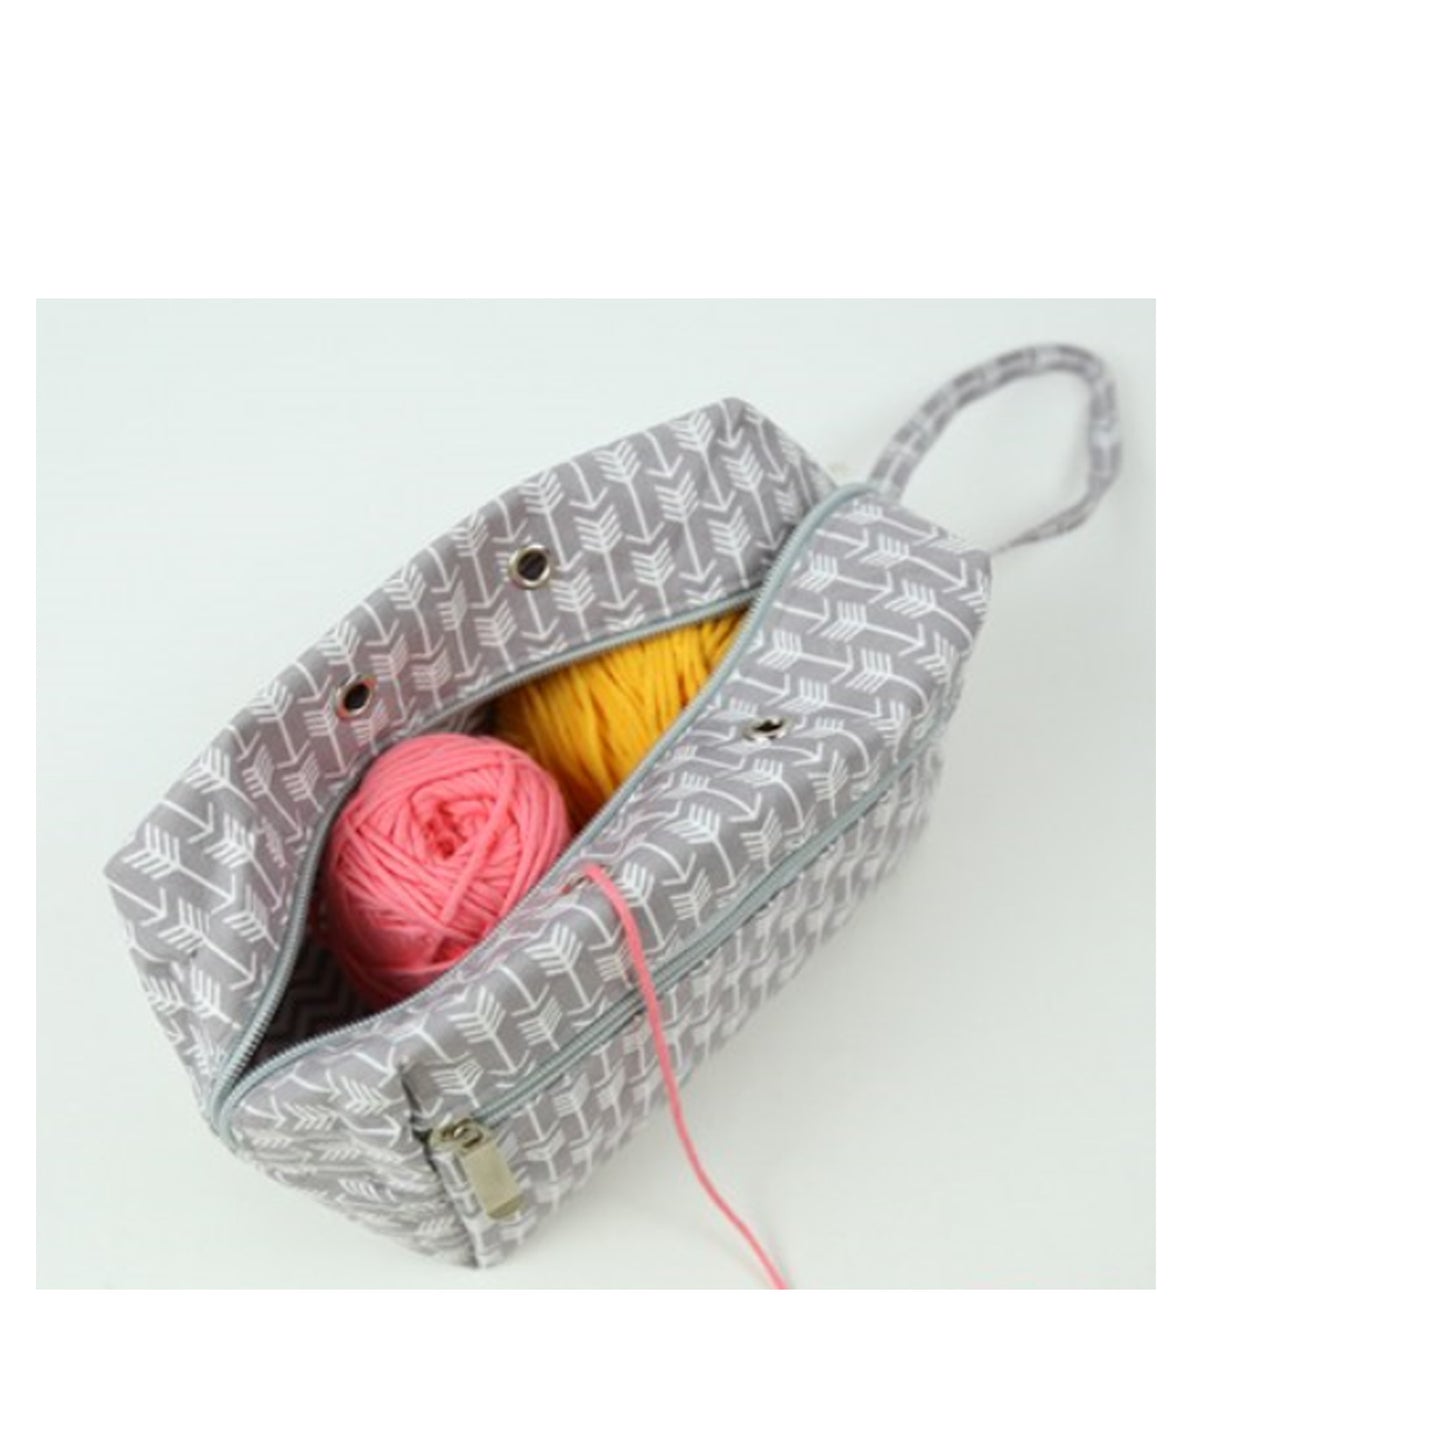 Knitting Bags with Zipper Closure with yarn holes